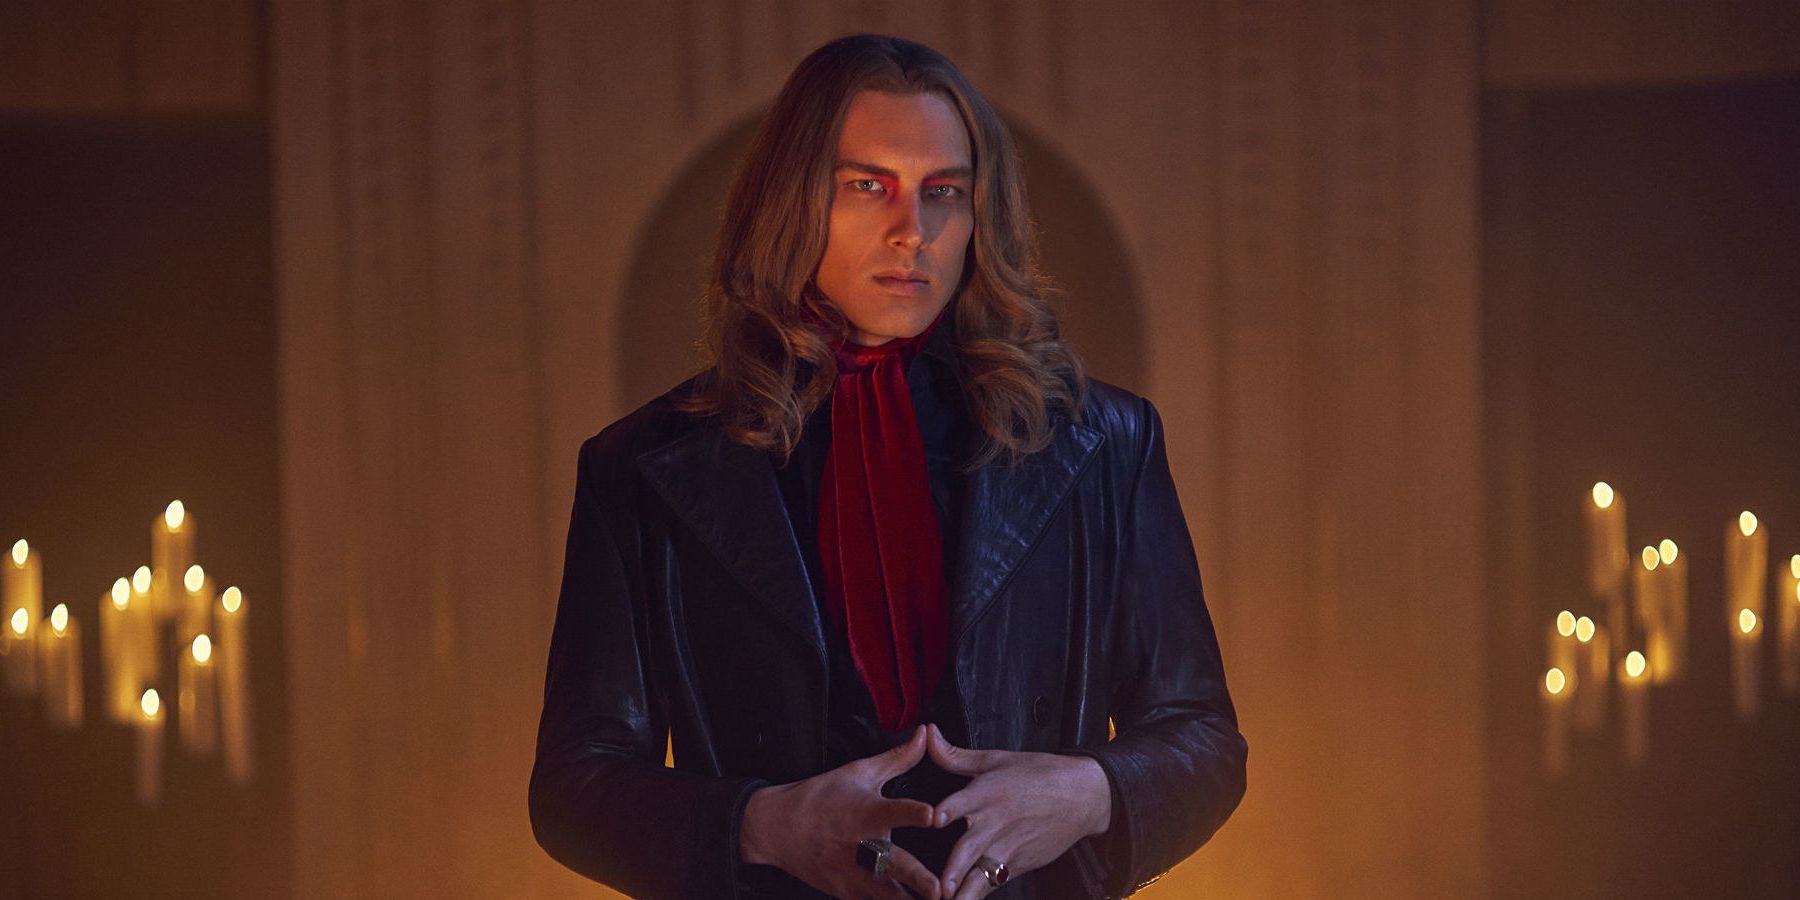 The Antichrist, Michael Langdon, in American Horror Story: Apocalypse.